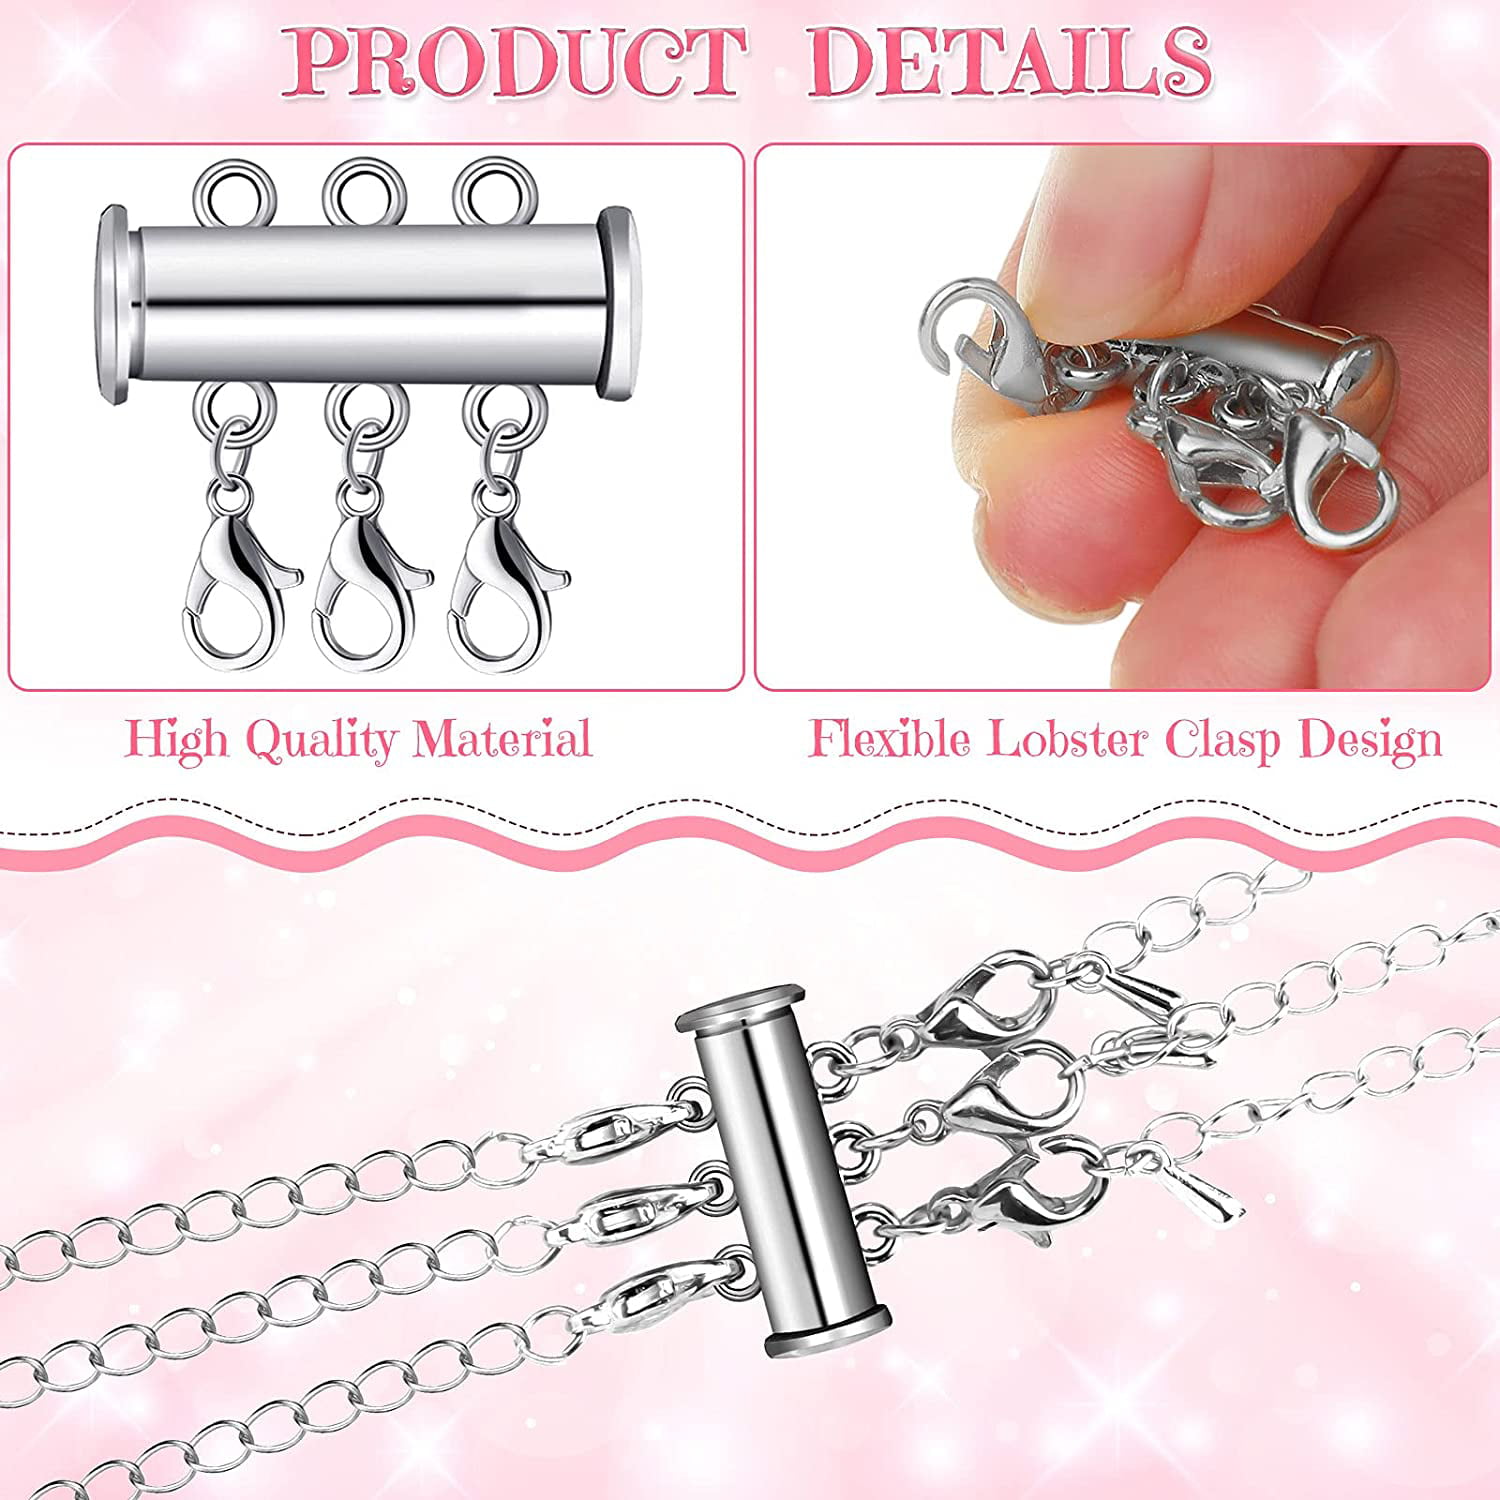 YMCAFZ Layered Necklace Spacer Clasp, 3 Strands Necklaces Slide Magnetic  Tube Lock with Lobster Clasps, Jewelry Clasps Connectors for Layered  Bracelet